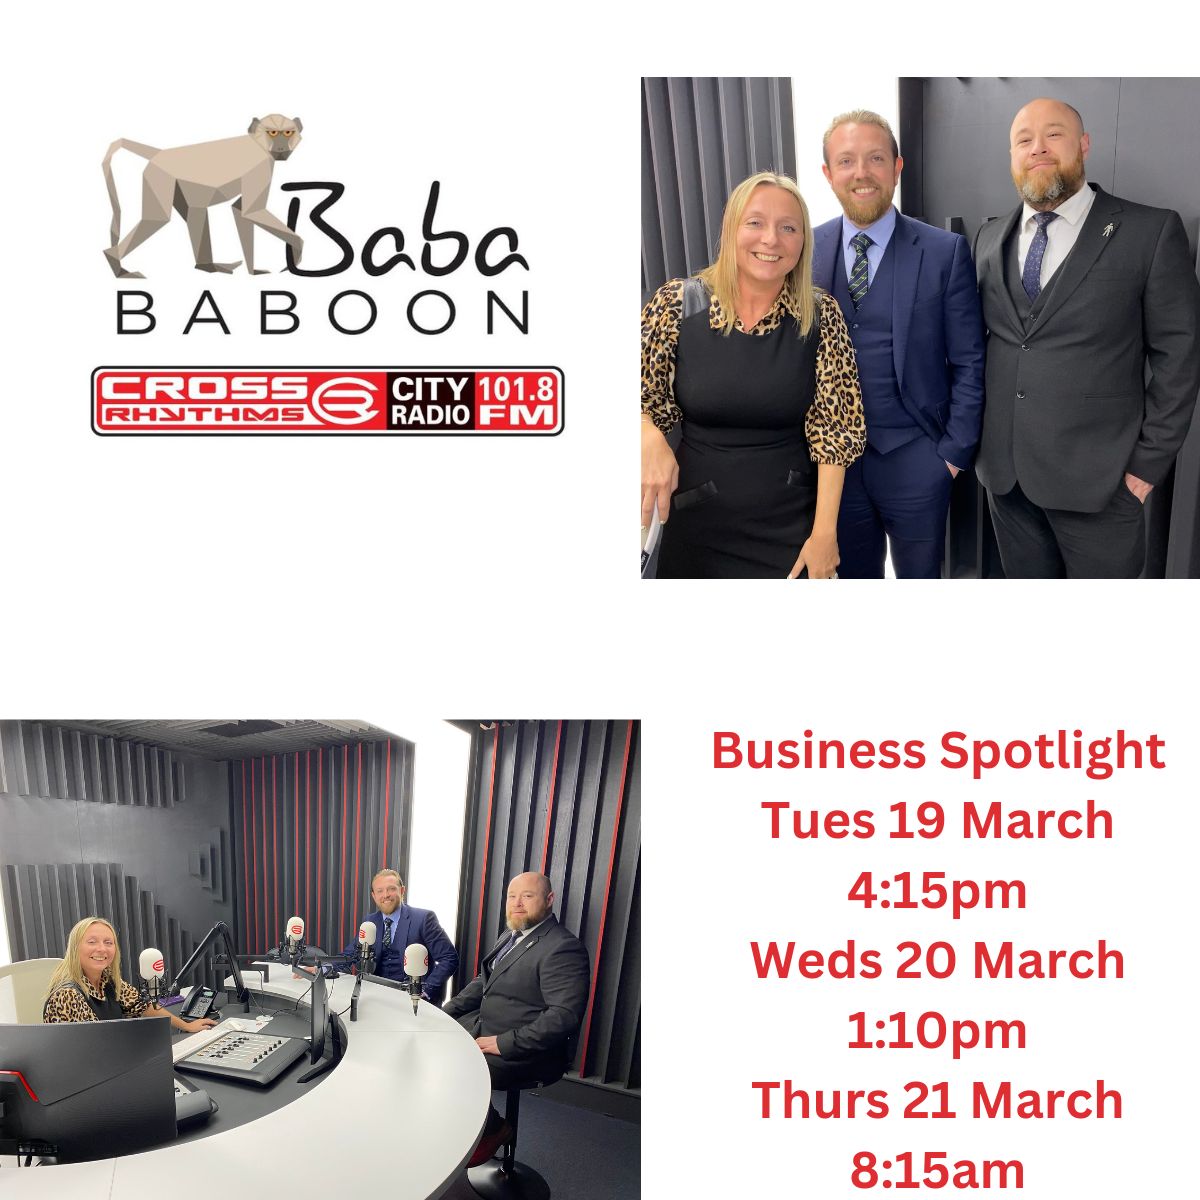 Business Spotlight this week welcomes Critchlow Estate Agents 🏡 @SonyaWakefield chats to Martin & Lee about the property market plus their new ONLINE auction service 📻 #BabaTastic #business #radio #property